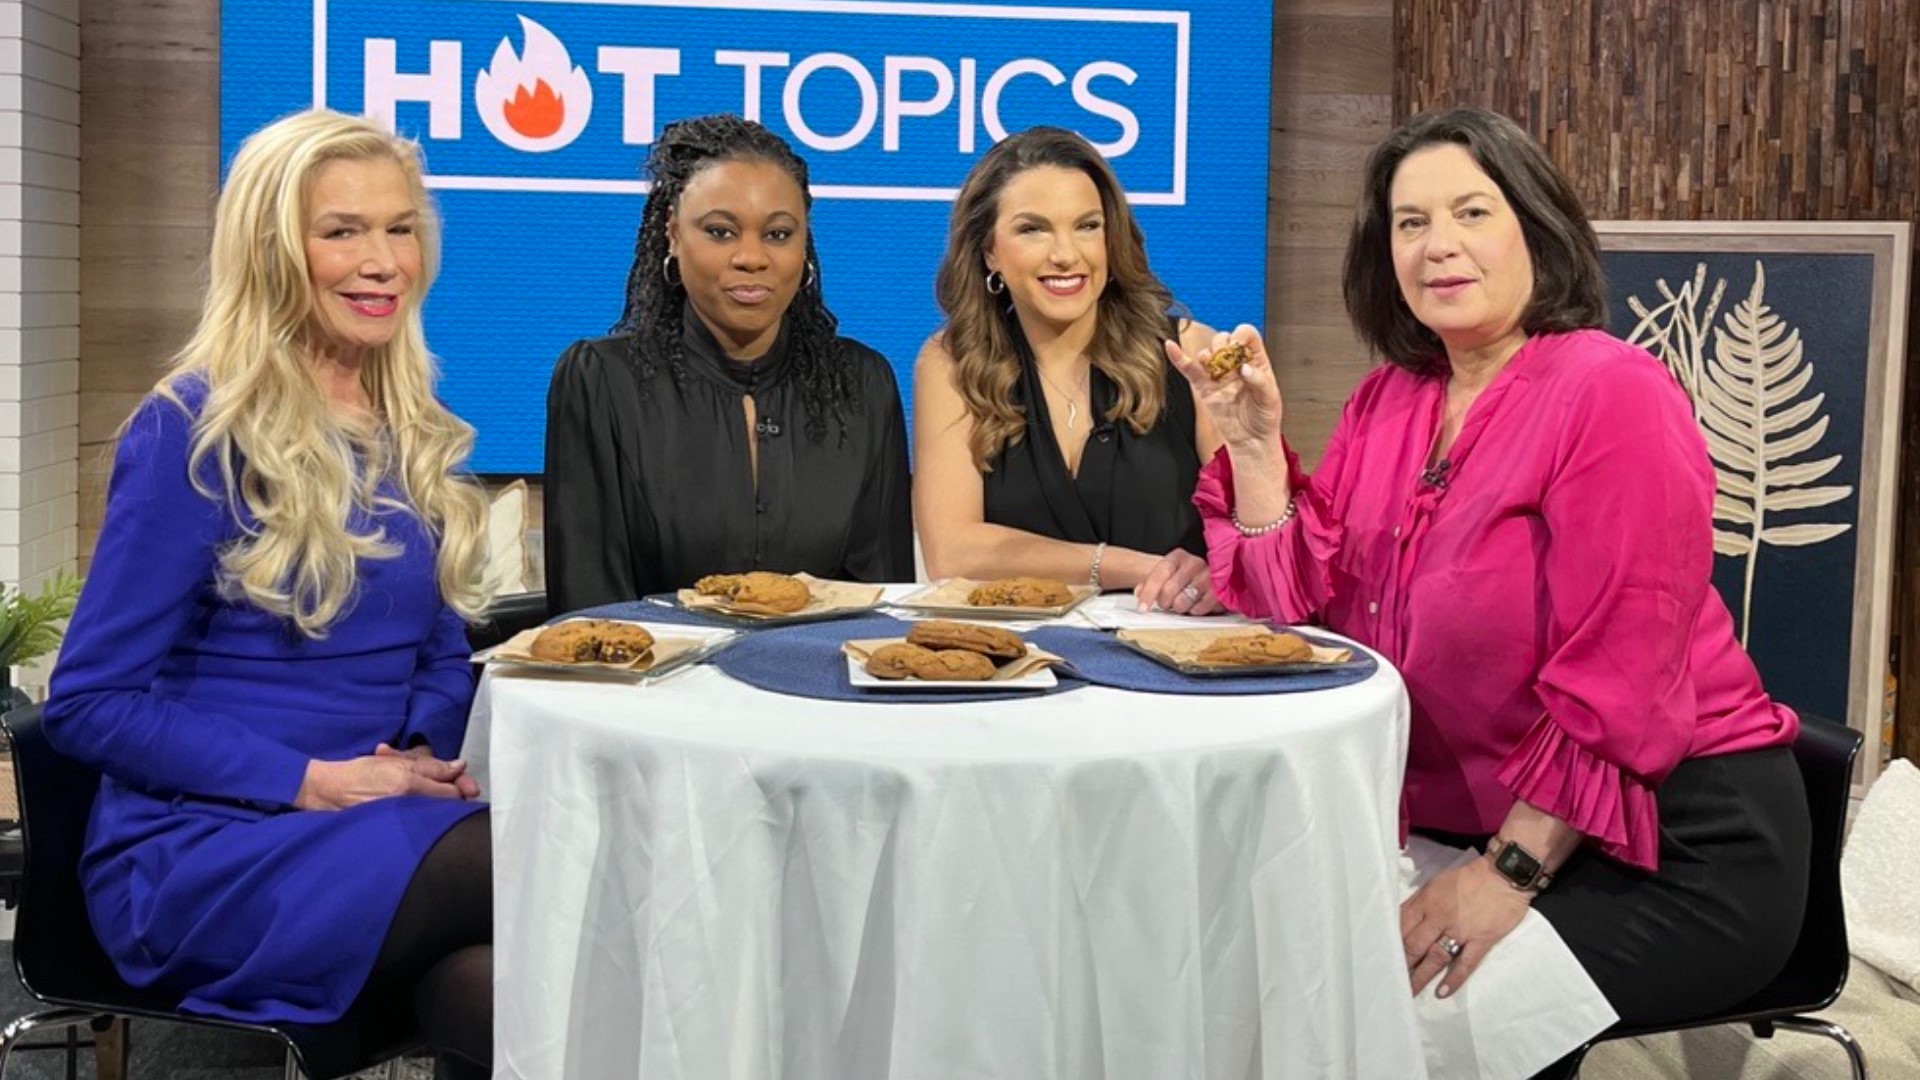 Defense Attorney Anne Bremner, Author of "Fill Your Tank" Laeisha Howard and Producer Suzie Wiley join Amity to talk about Costco's new cookie, Taylor Swift and more